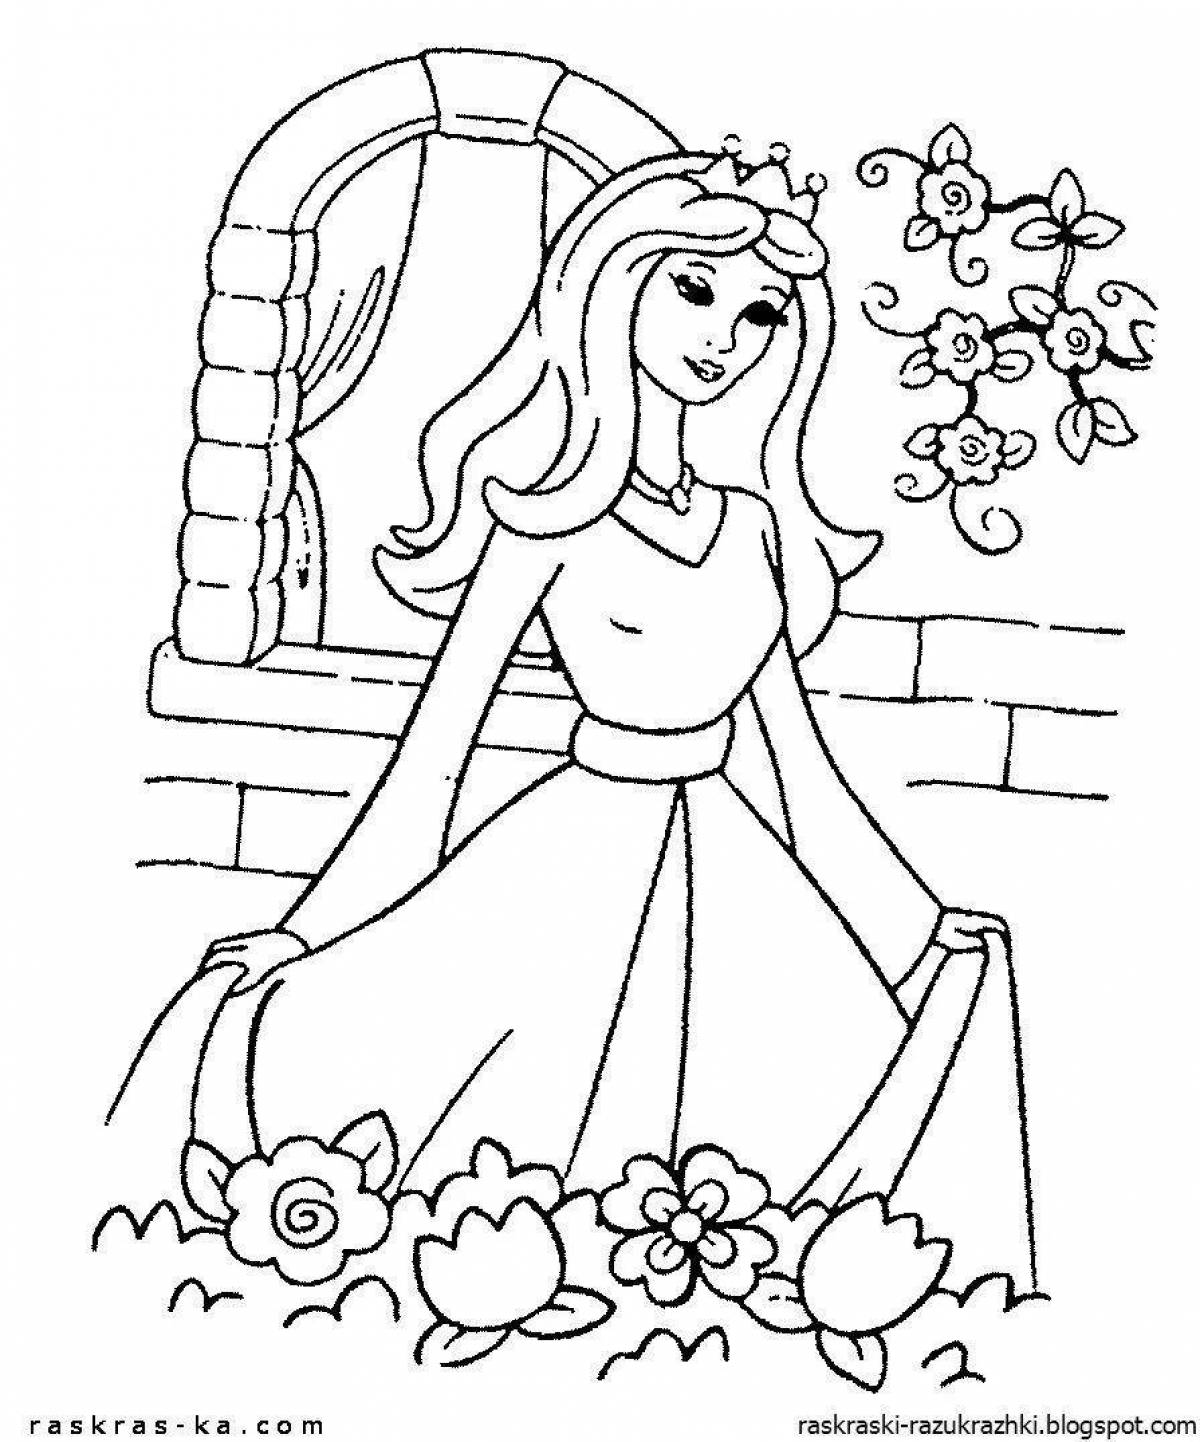 Coloring pages for children 8 years old